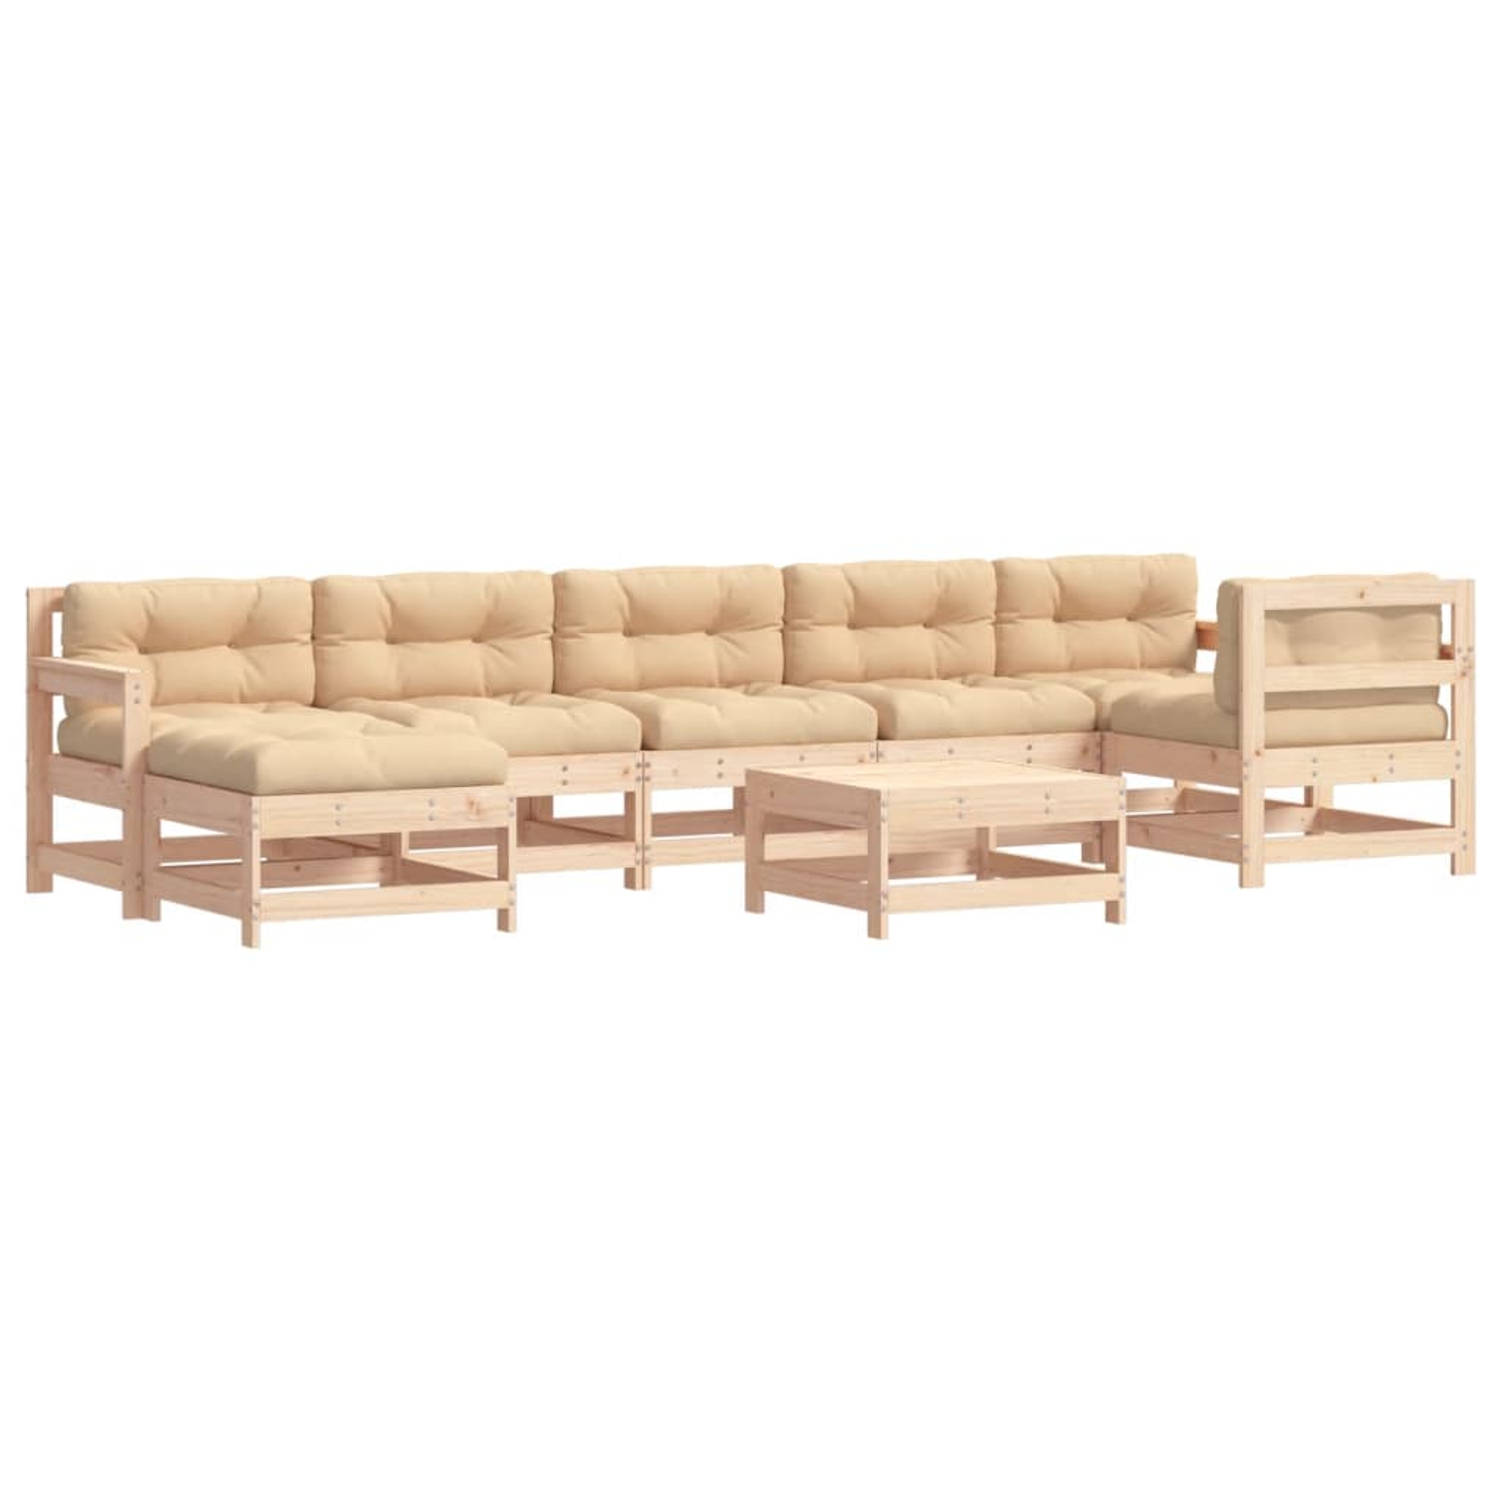 The Living Store 8-delige Loungeset met kussens massief hout - Tuinset